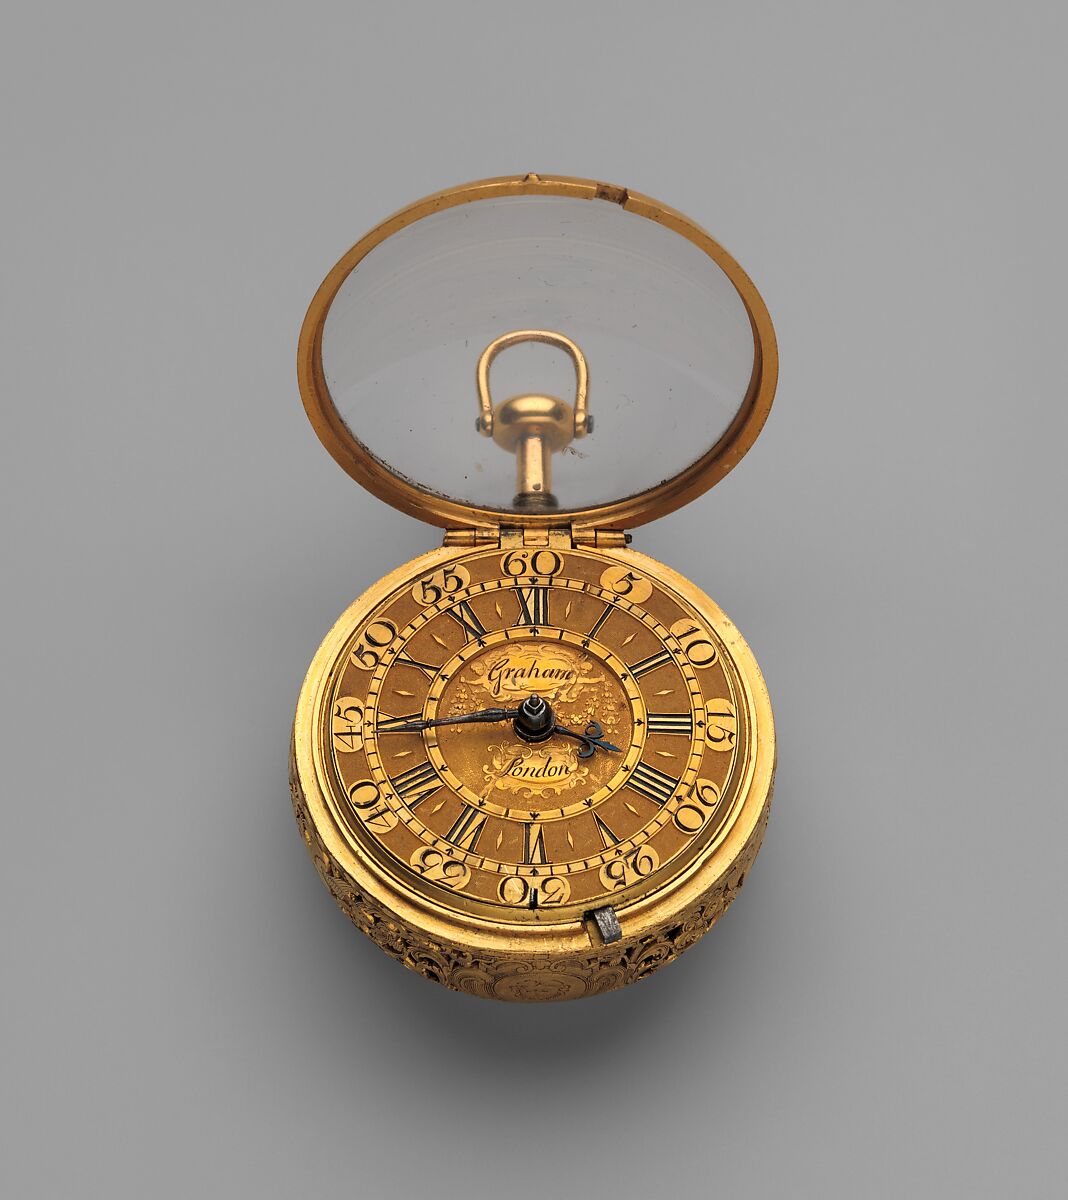 Pair-case watch with quarter repeating mechanism, Watchmaker: George Graham (British, 1673–1751), Outer and inner cases: gold; Dial: champlevé gold; Movement: gilded brass and partly blued steel, British, London 